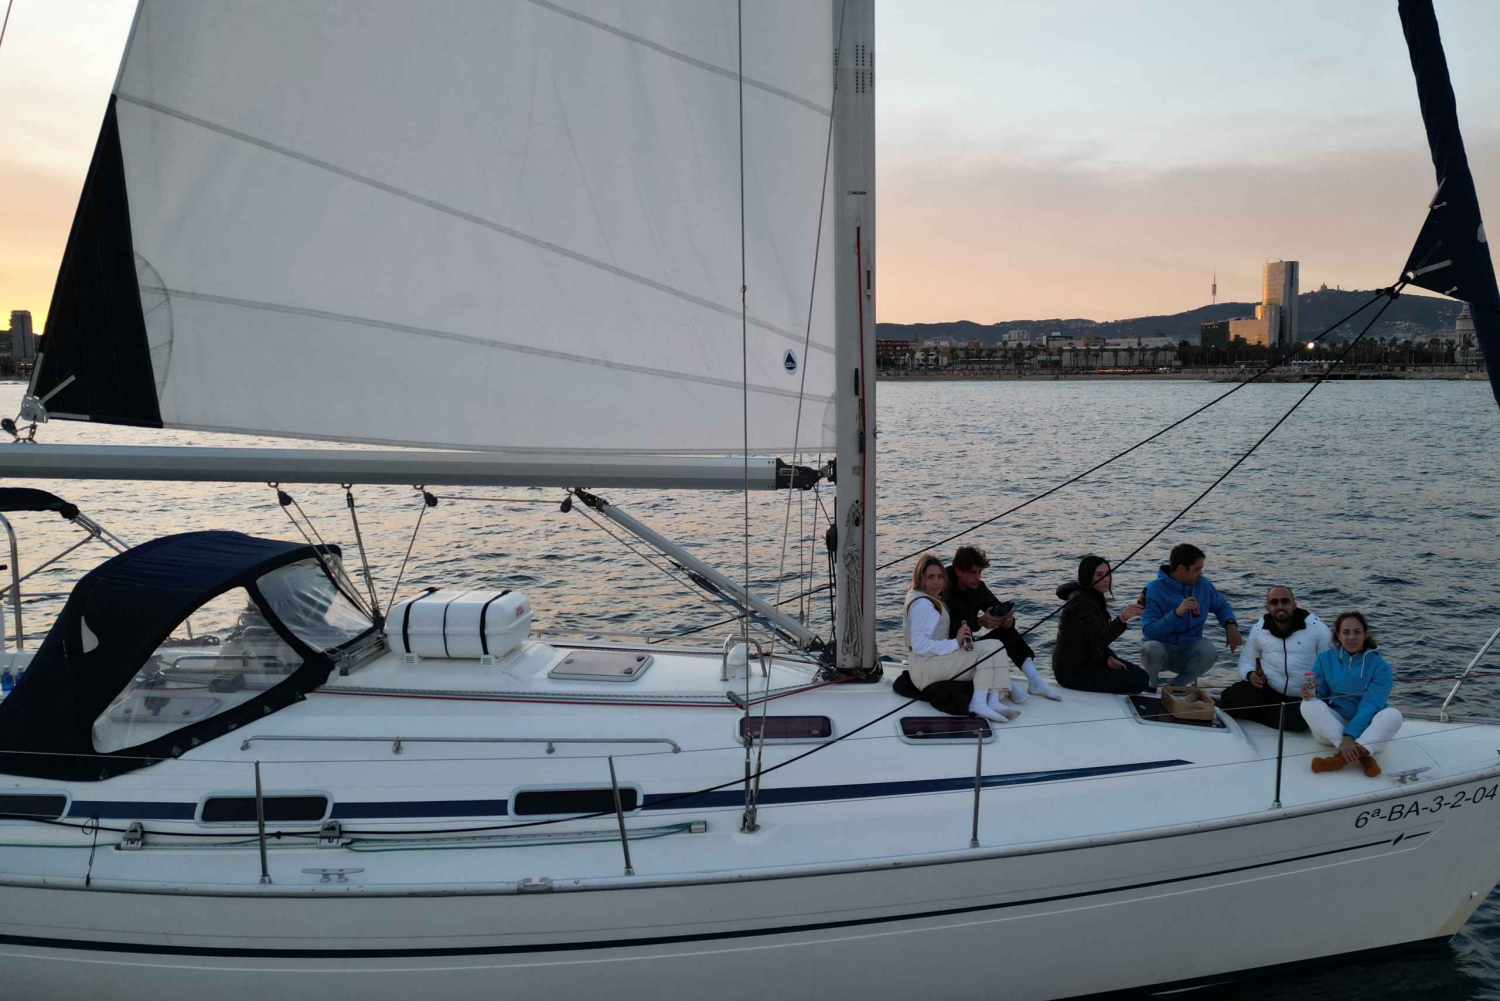 Barcelona: Sailing Trip with Young and Local Captain